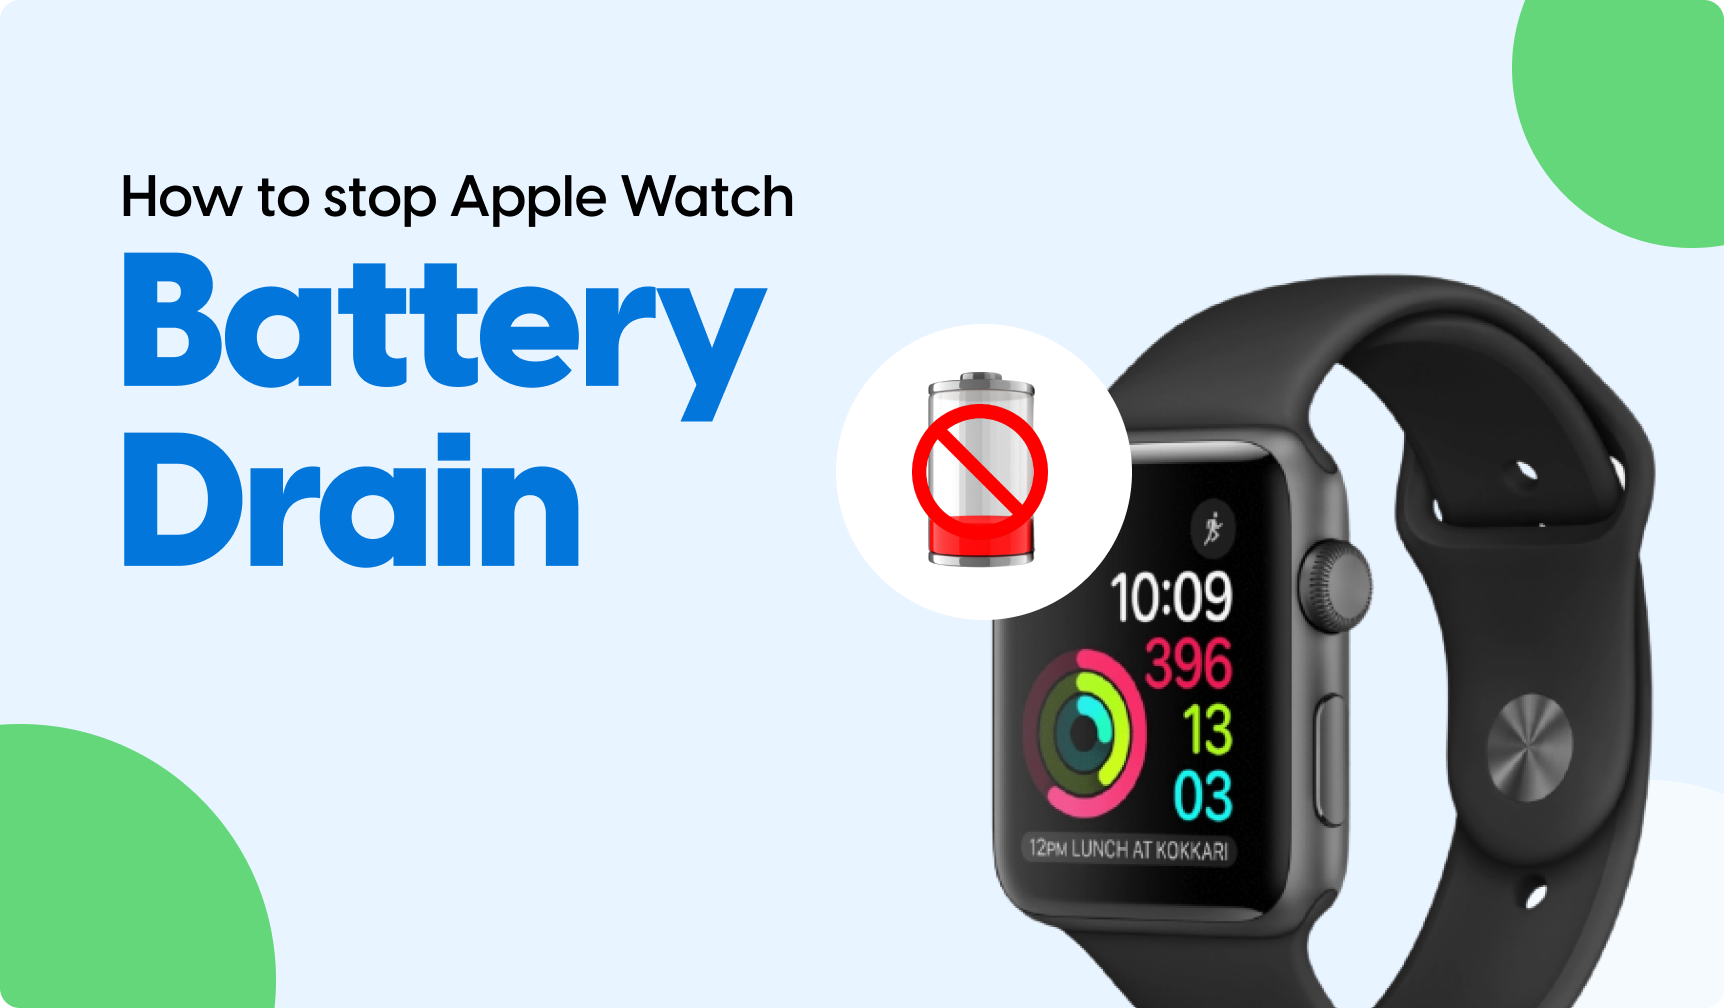 Apple Watch Battery Drain How To Fix!